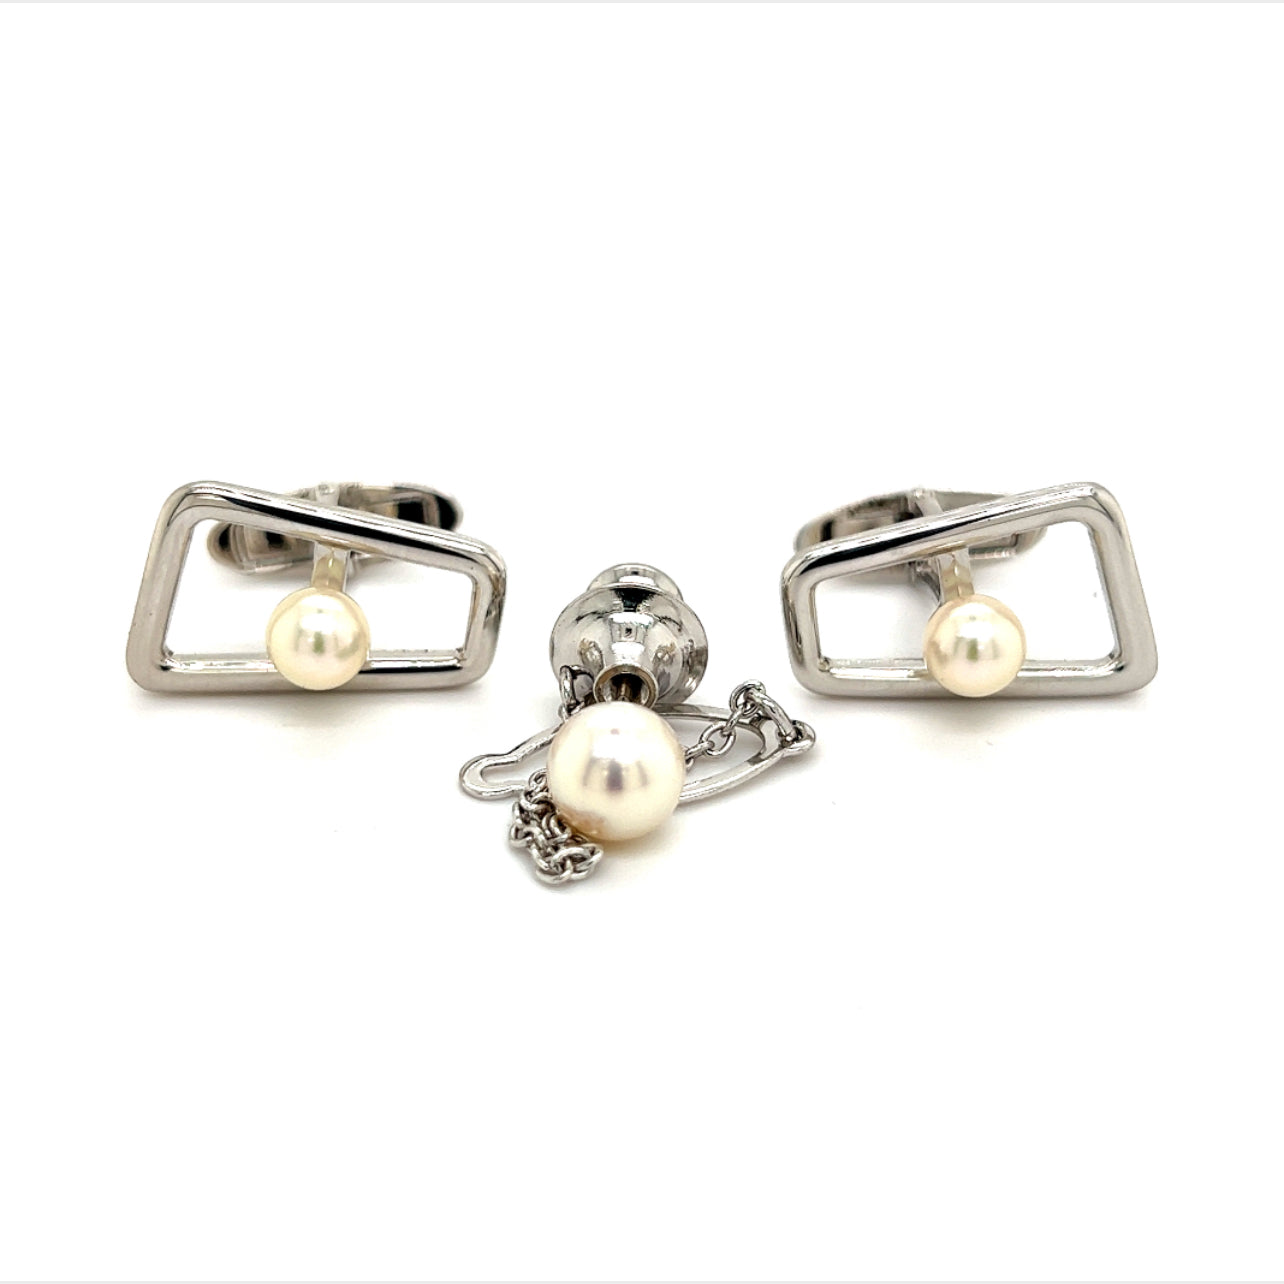 Mikimoto Estate Akoya Pearl Cufflinks and Tie Pin Sterling Silver 7.28 mm M276